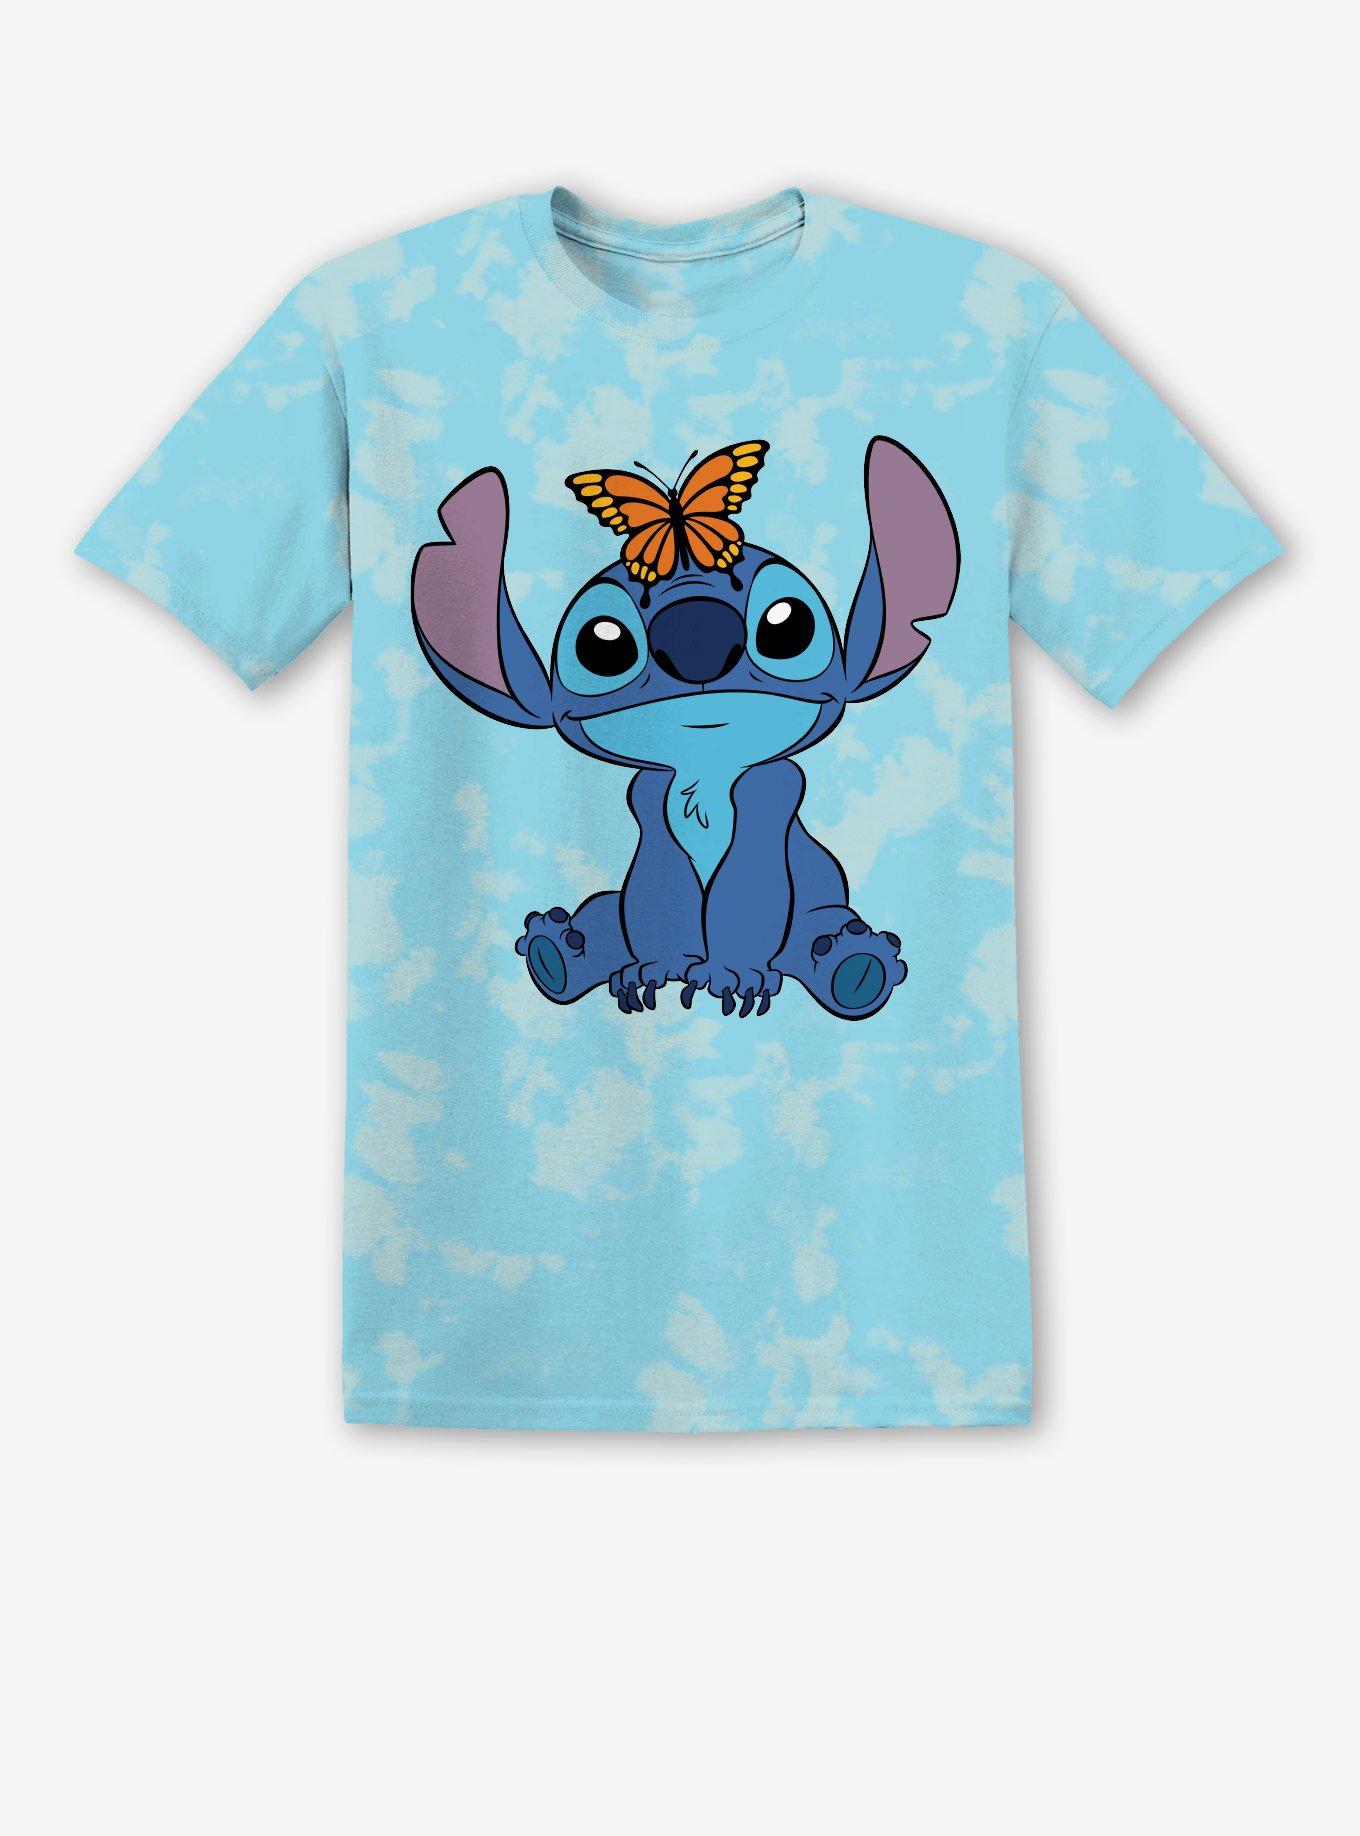 Disney T Shirts for Women Ladies Summer Tops Stitch Gifts